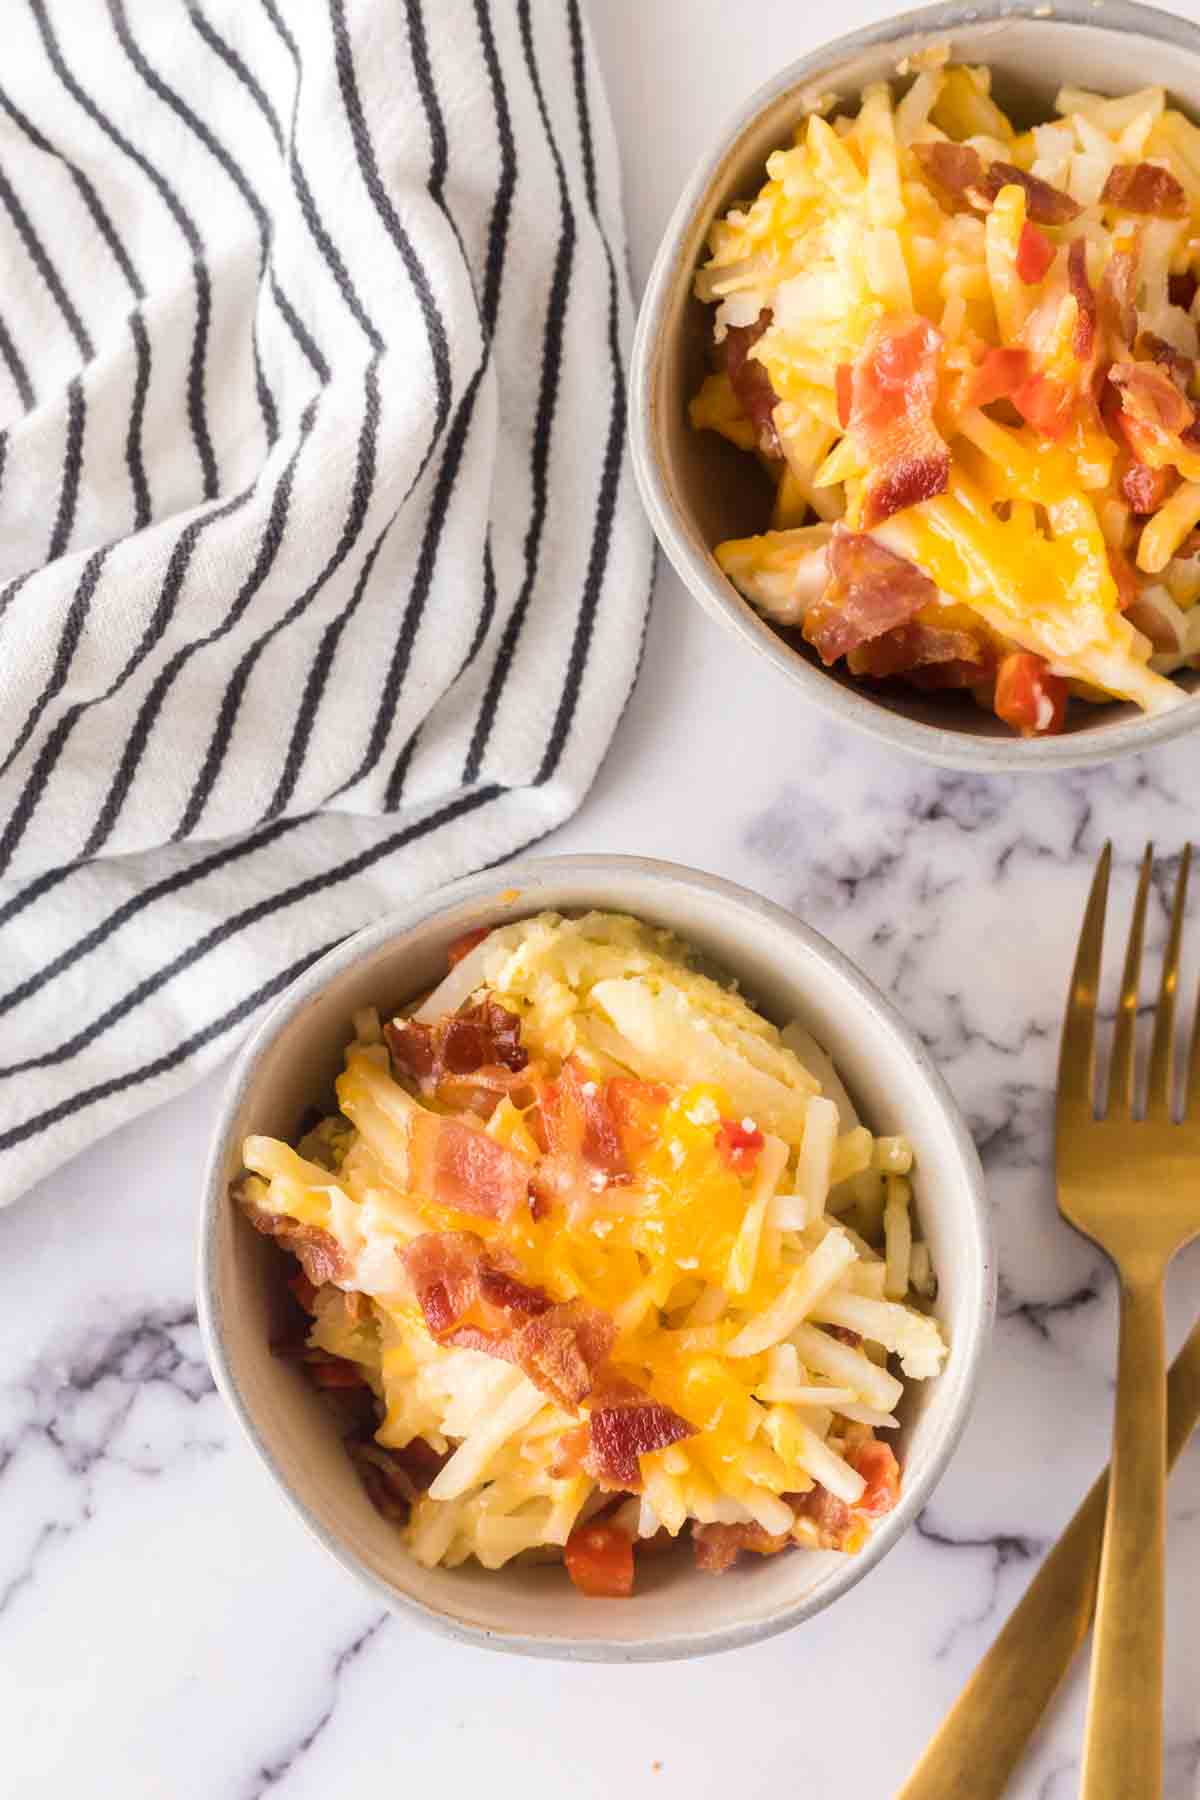 small portion dishes of the baked hash brown breakfast casserole with melted cheese and bacon on top